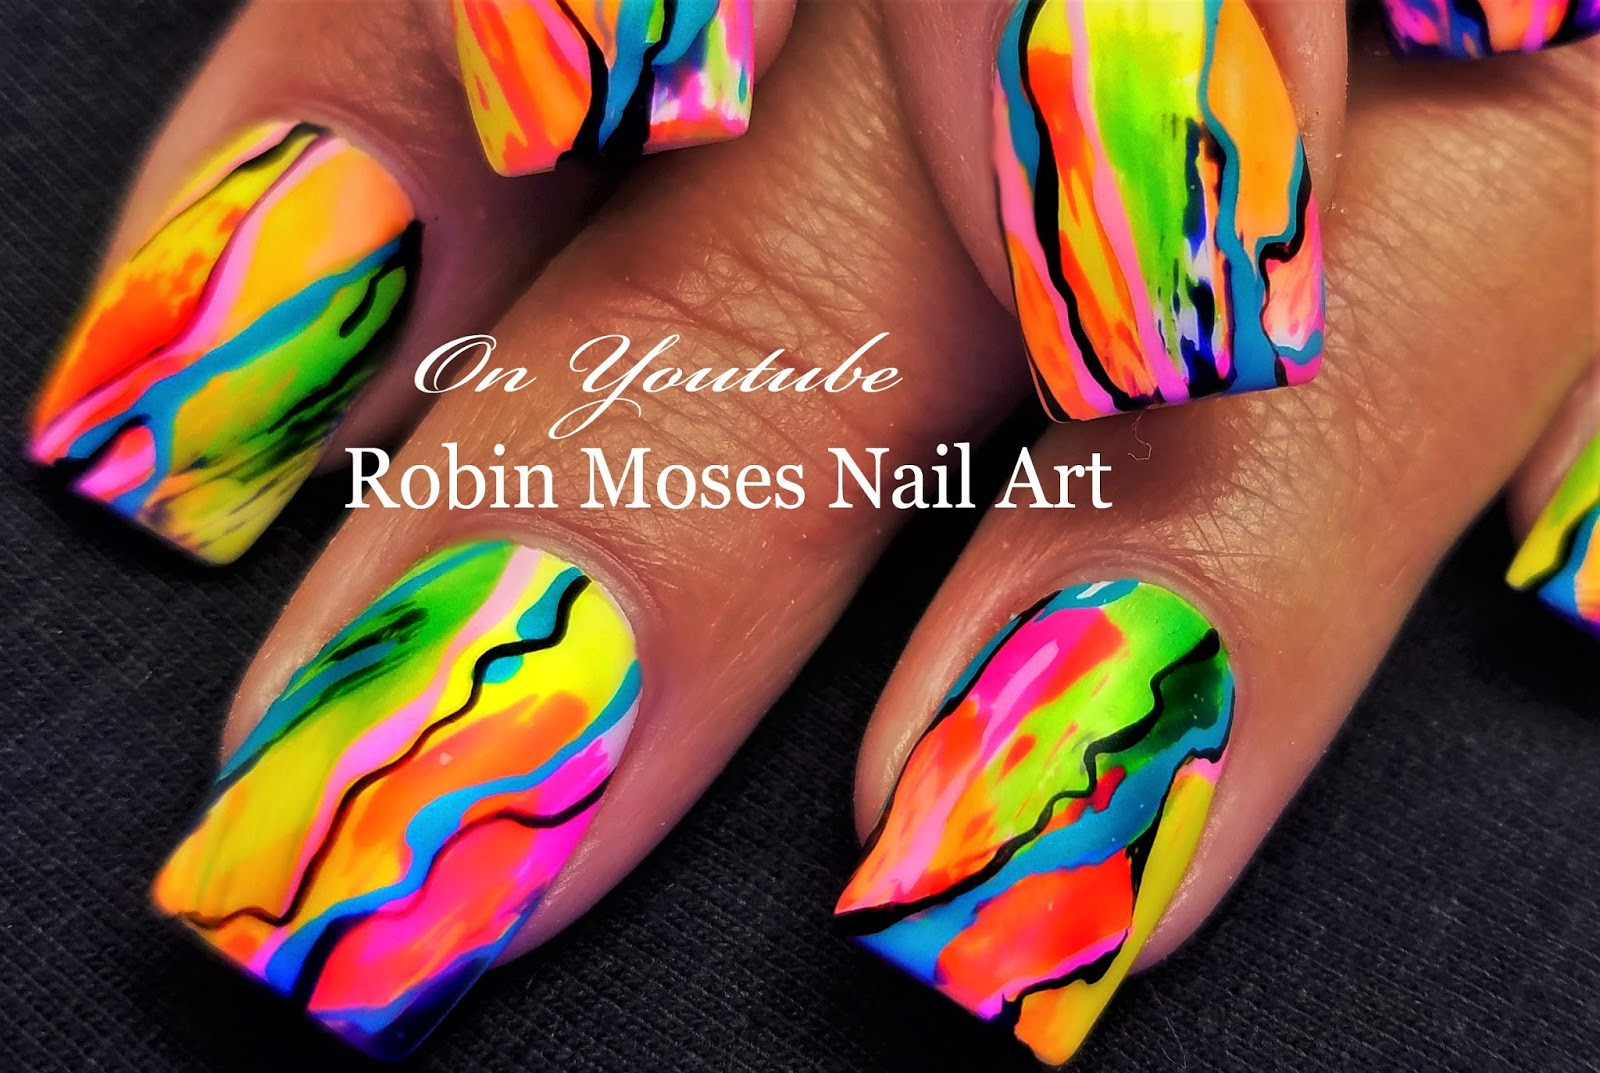 Robin Moses Nail Art Brushes for Sale on Amazon - wide 4